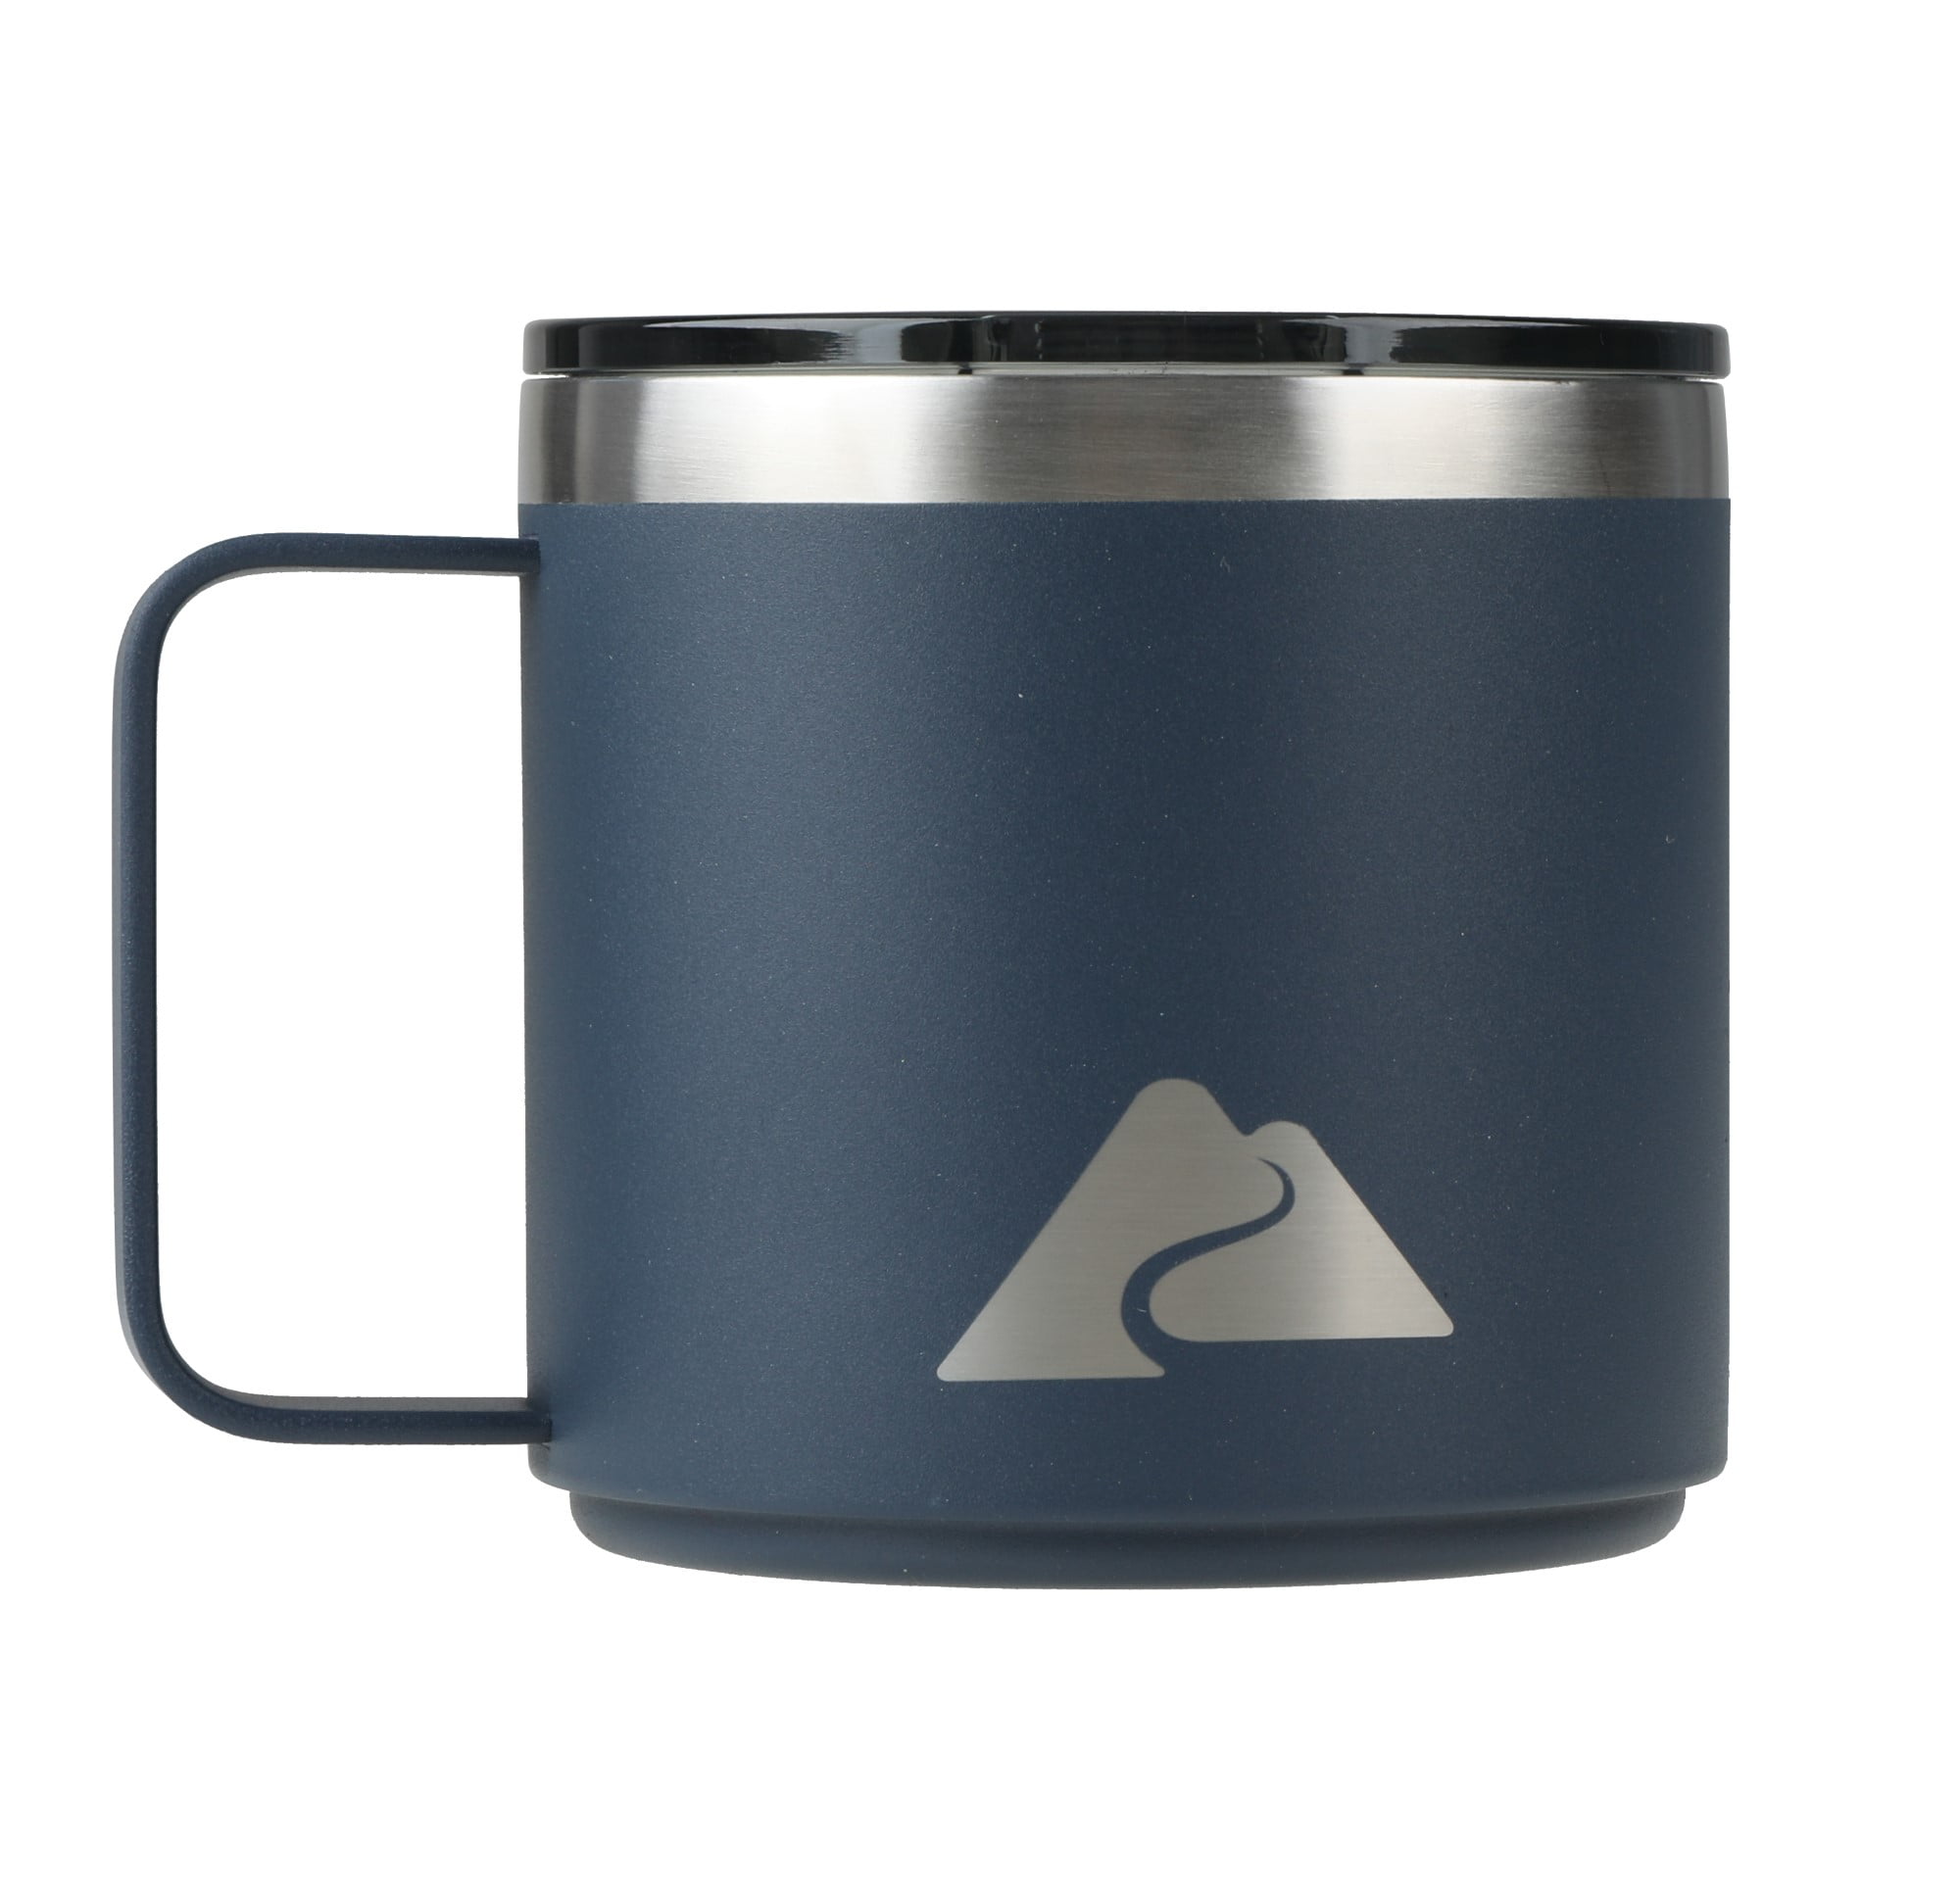 Hydrapeak 14oz Stainelss Steel Coffee Mug With Handle And Lid